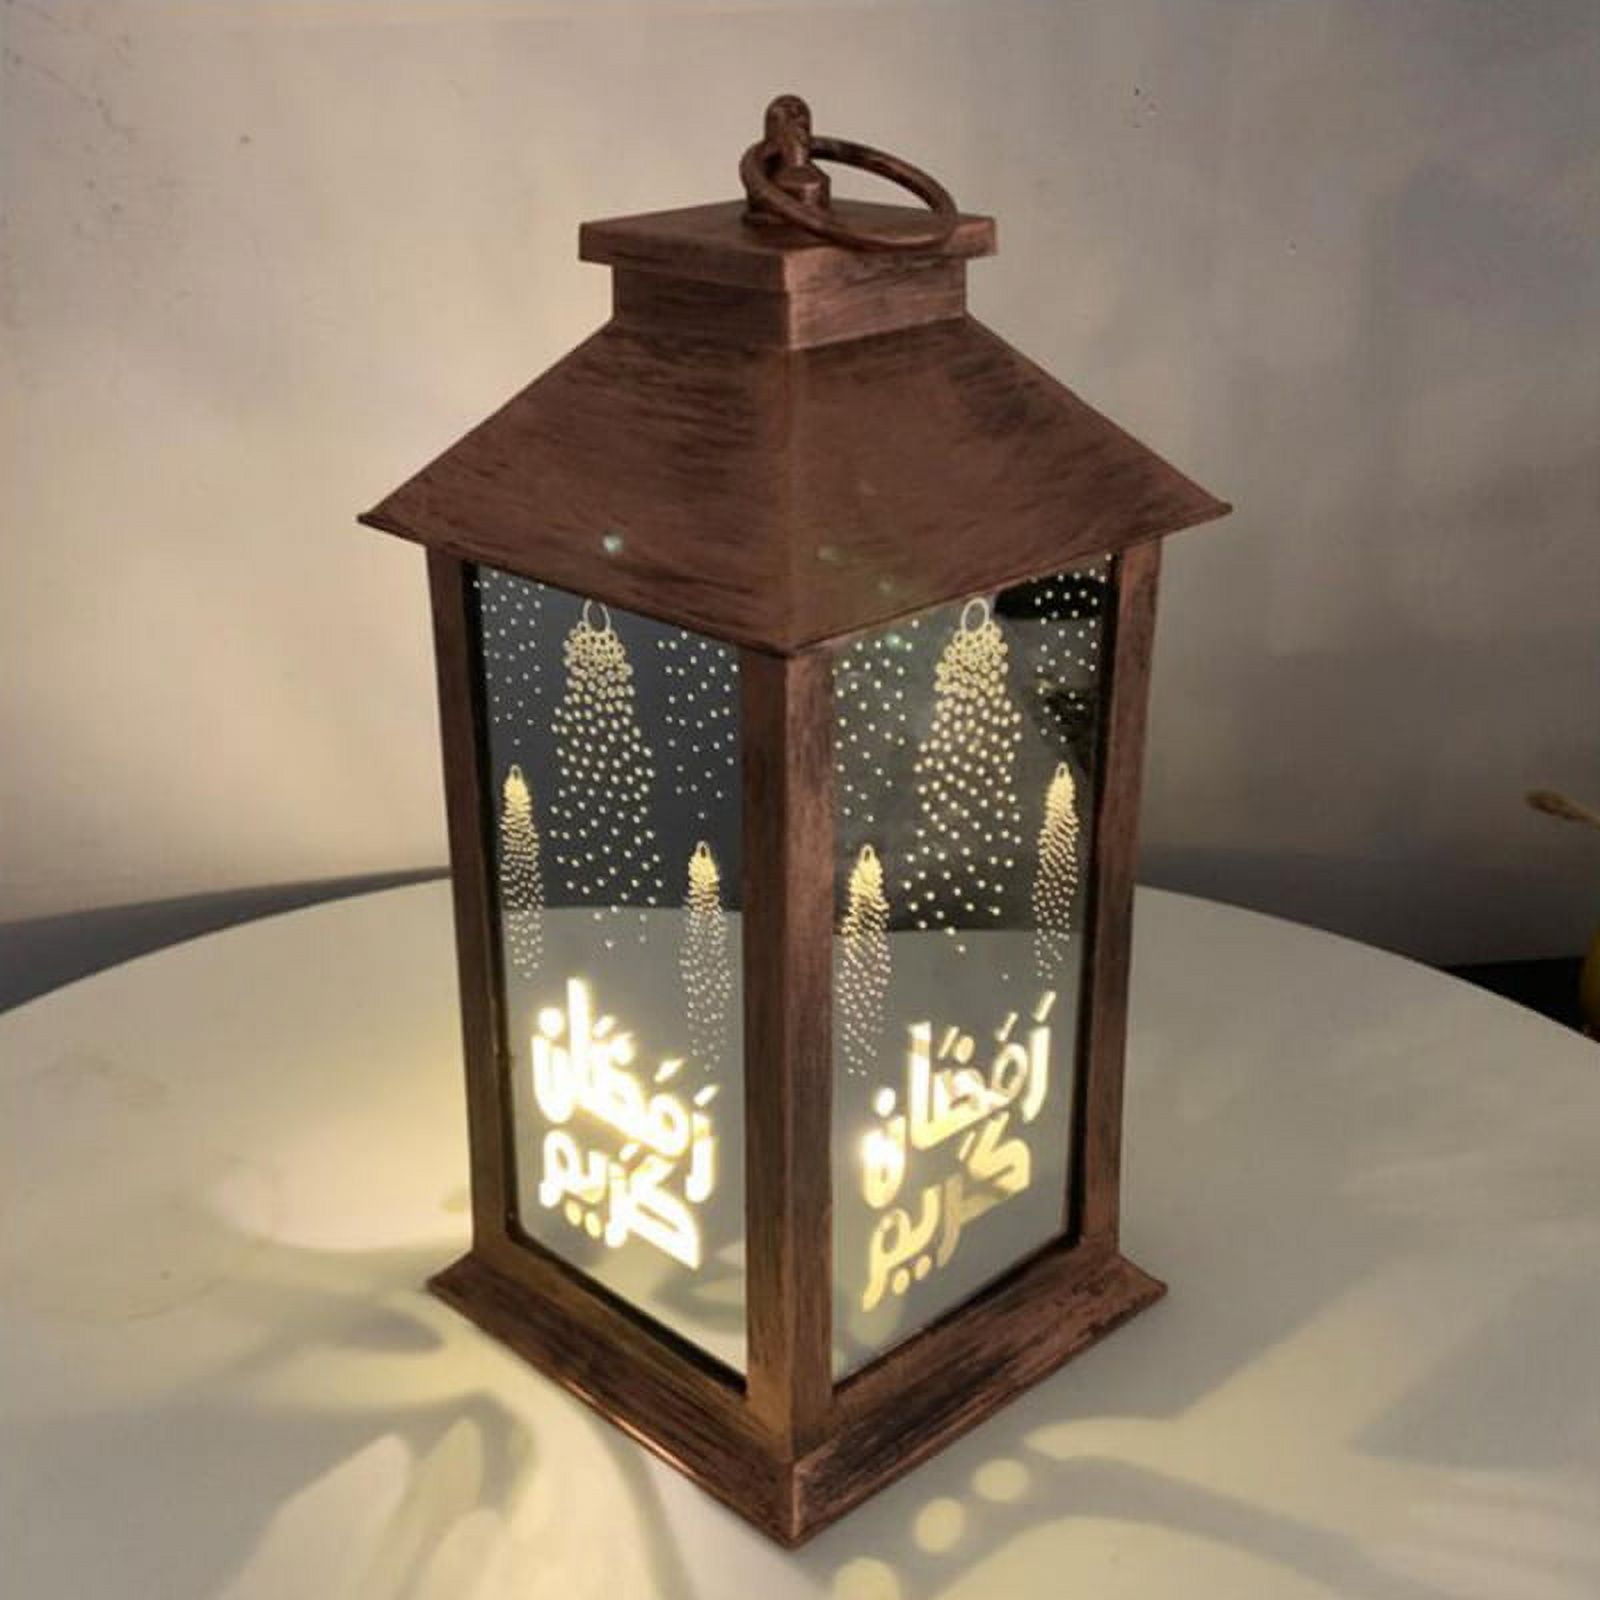 Ailytec Mini Lantern with LED Star - 5 inch Tall, Warm White Star Light, Ramadan Table Decor Centerpiece, Battery Included, Size: 5.1, Black